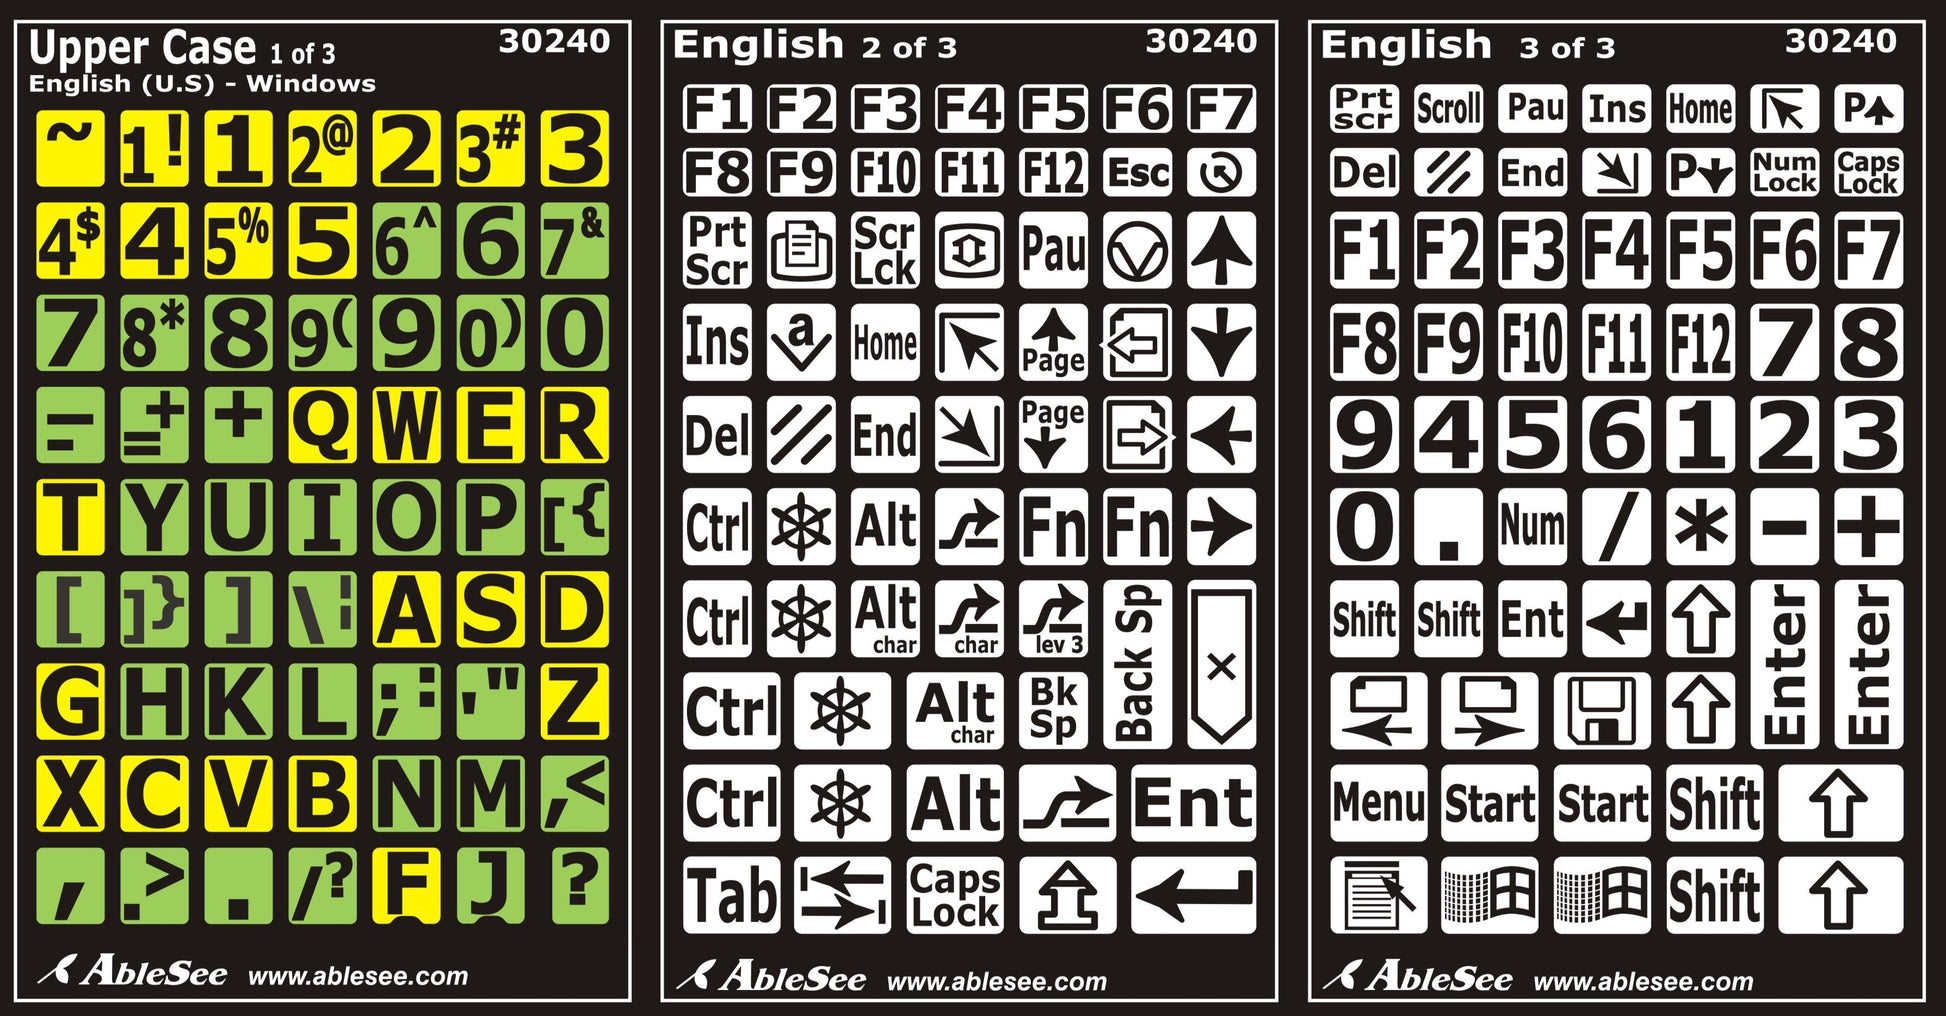 stickers-to-split-keyboard-into-rows-caps-30240